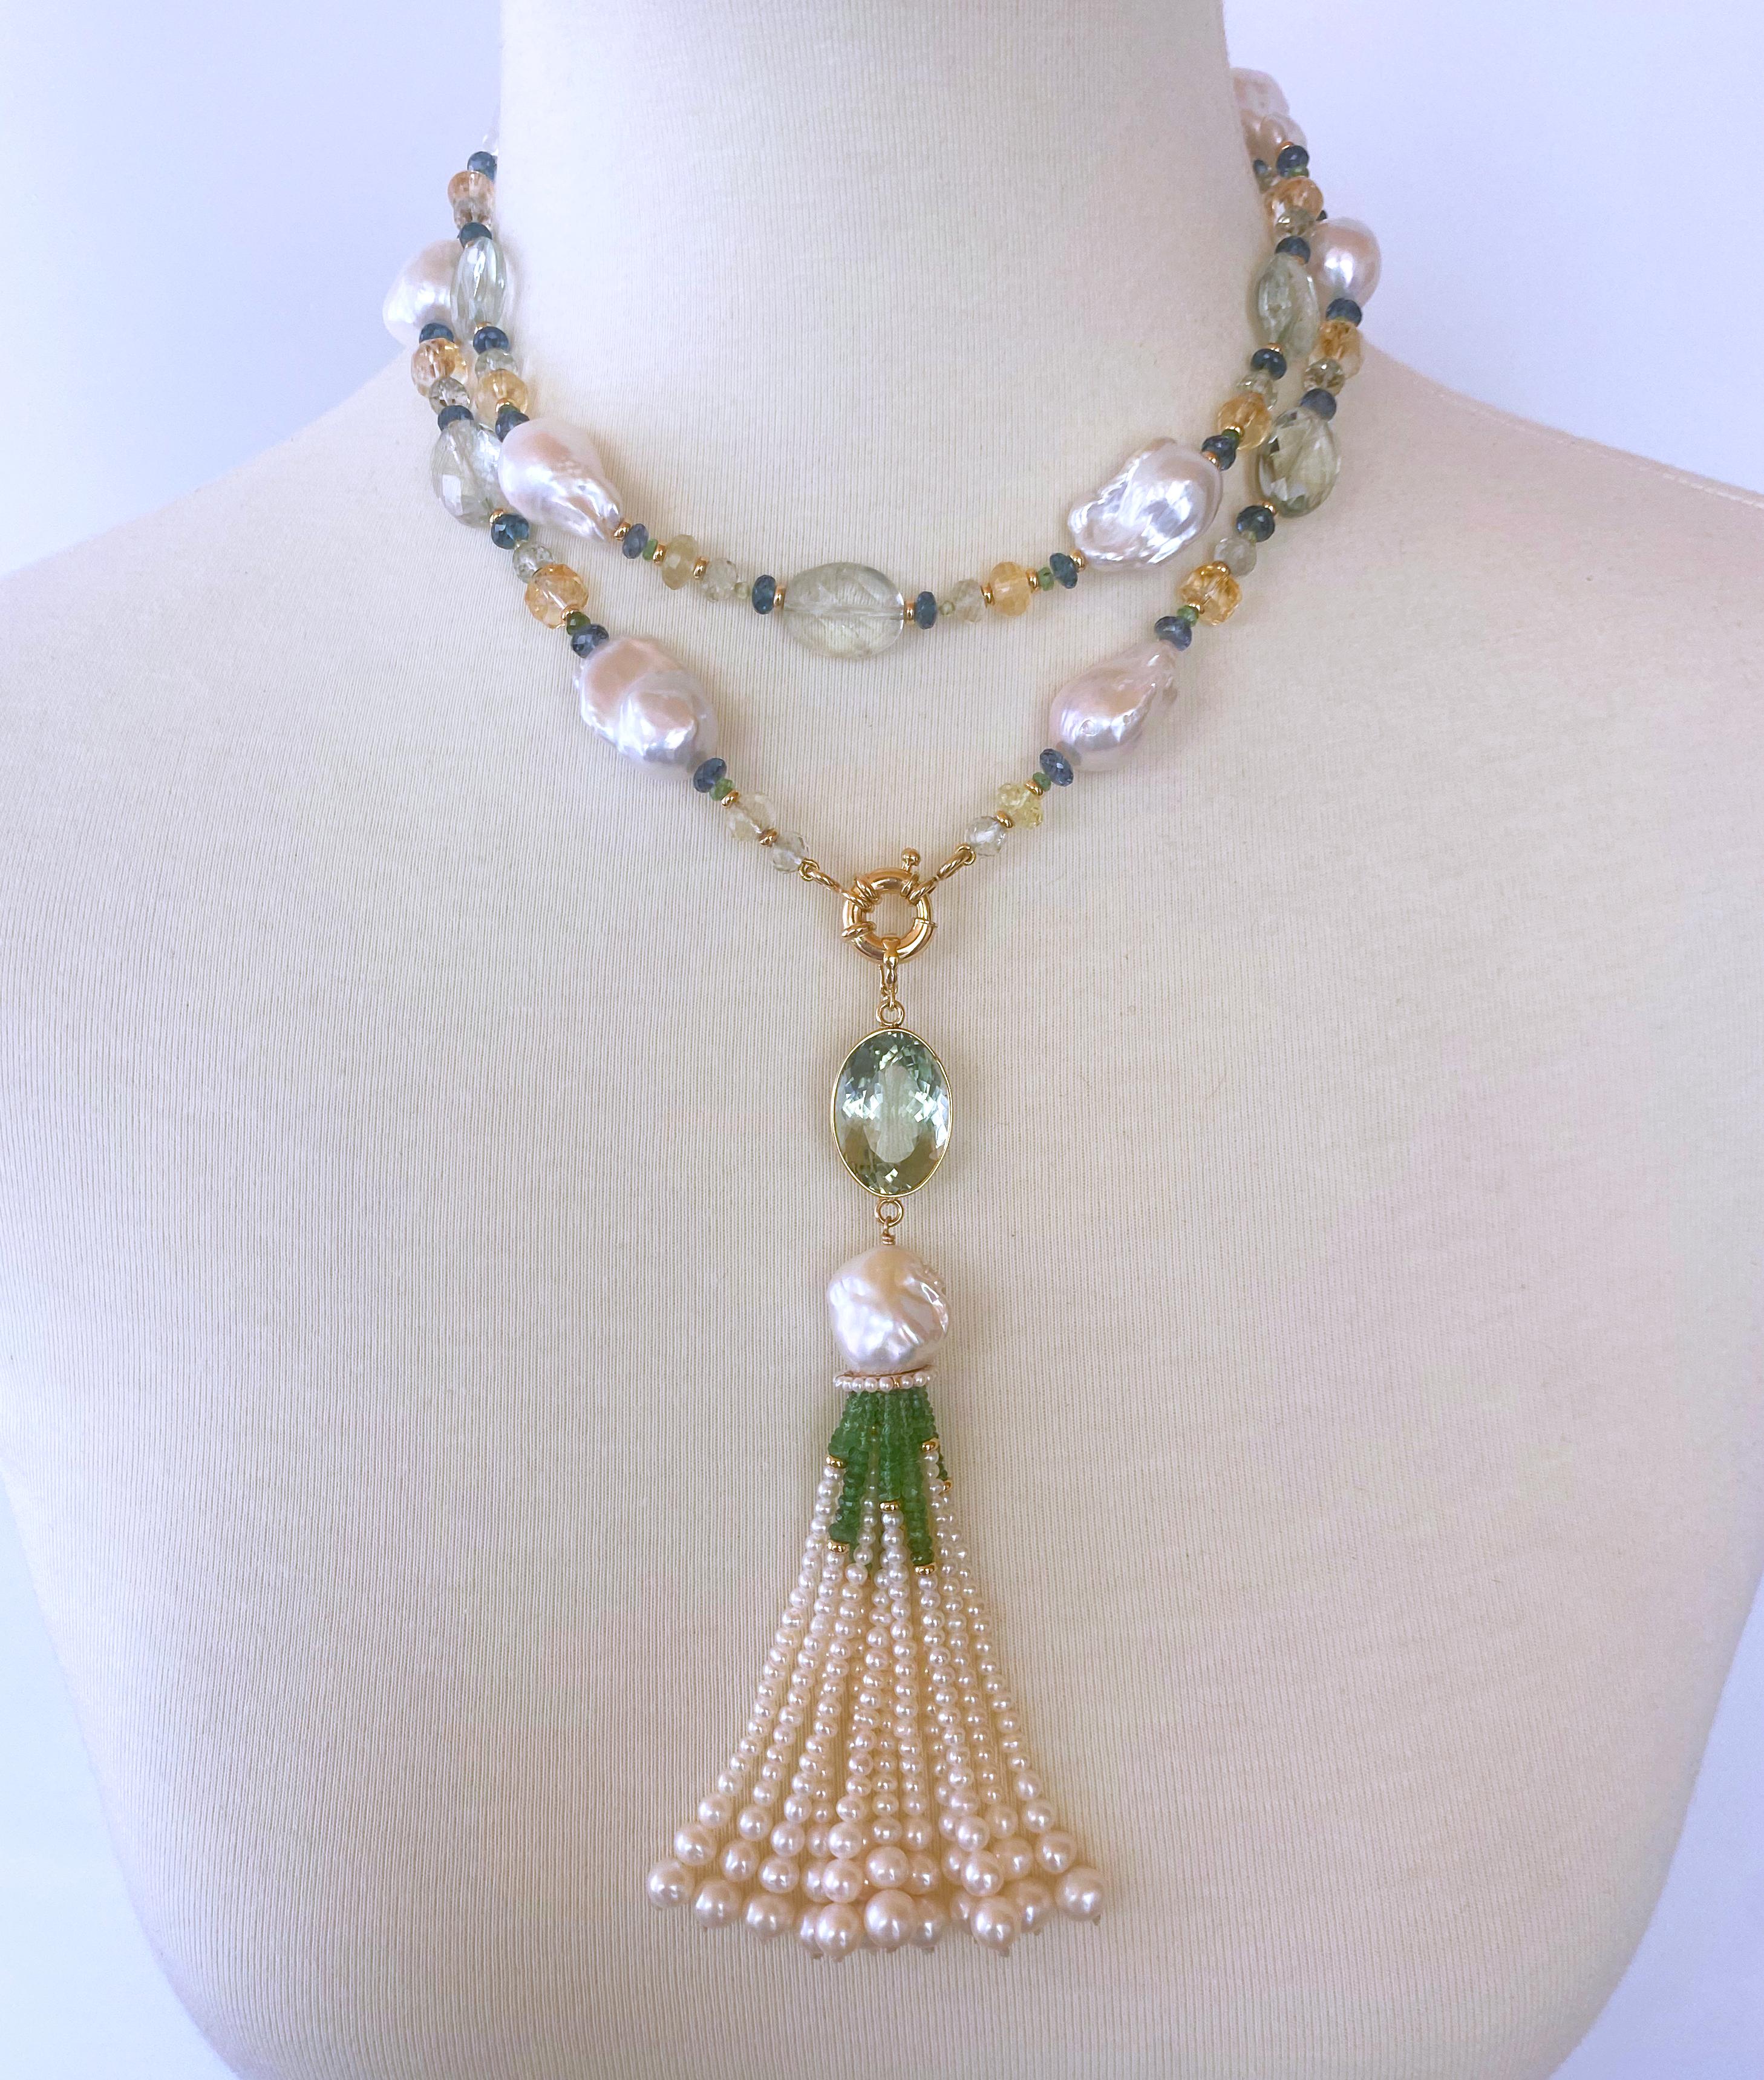 Gorgeous piece hand made by Marina J. This stunning Sautoir is made using multi shaped and colored Semi Precious Stones all strung together with gorgeous high luster Baroque Pearls. Large Green Amethyst, Citrine, London Blue Topaz, Aquamarine,